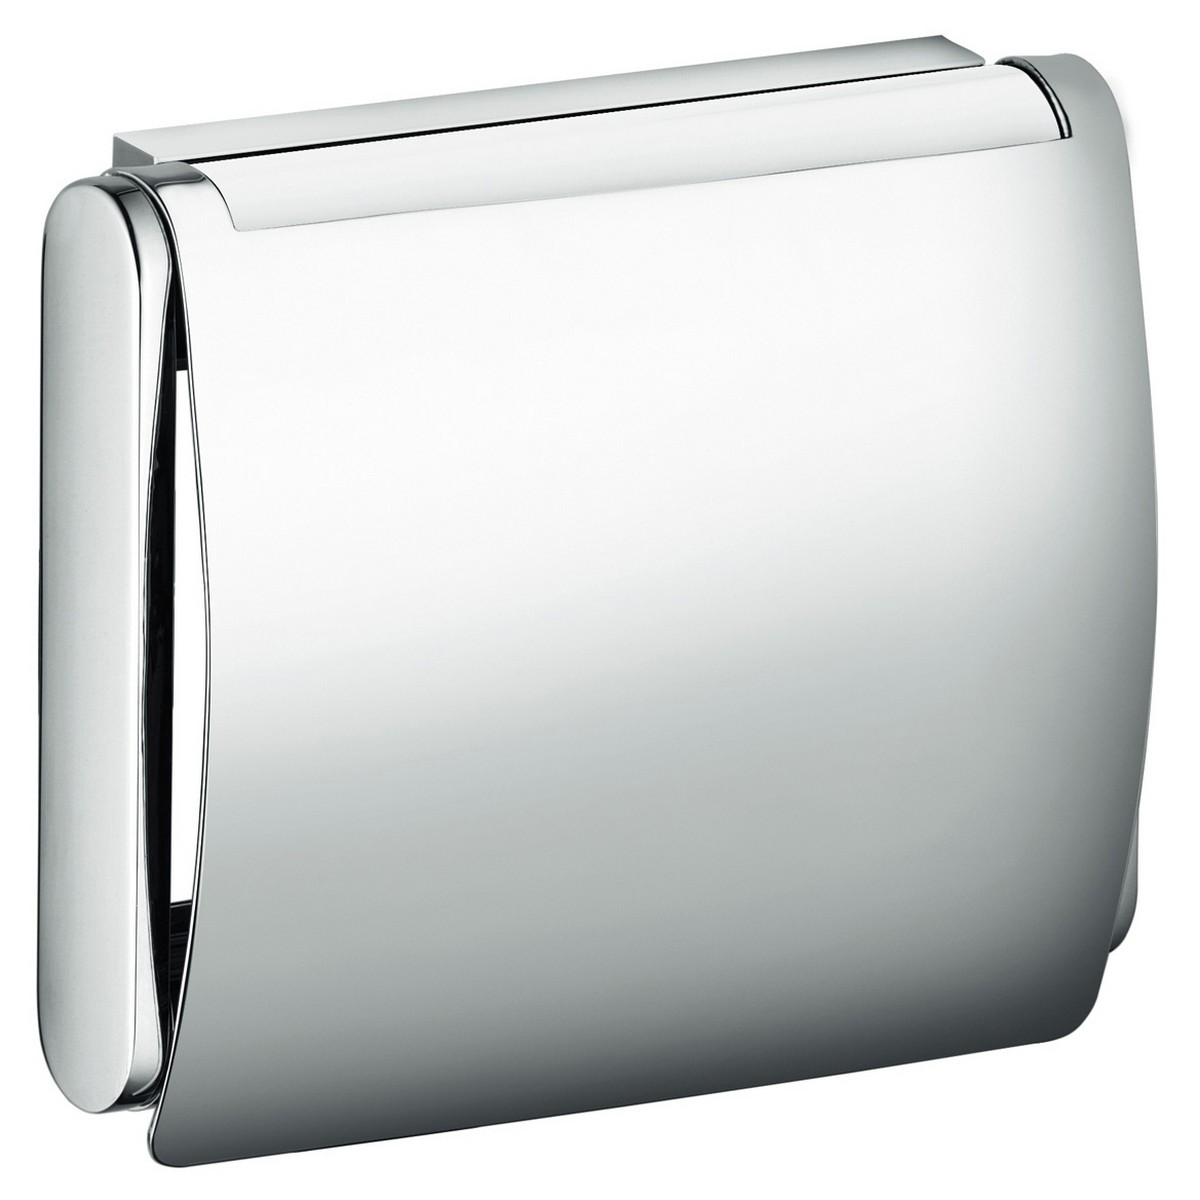 KEUCO 149600000 PLAN 5 1/4 INCH WALL MOUNTED TOILET PAPER HOLDER WITH COVER